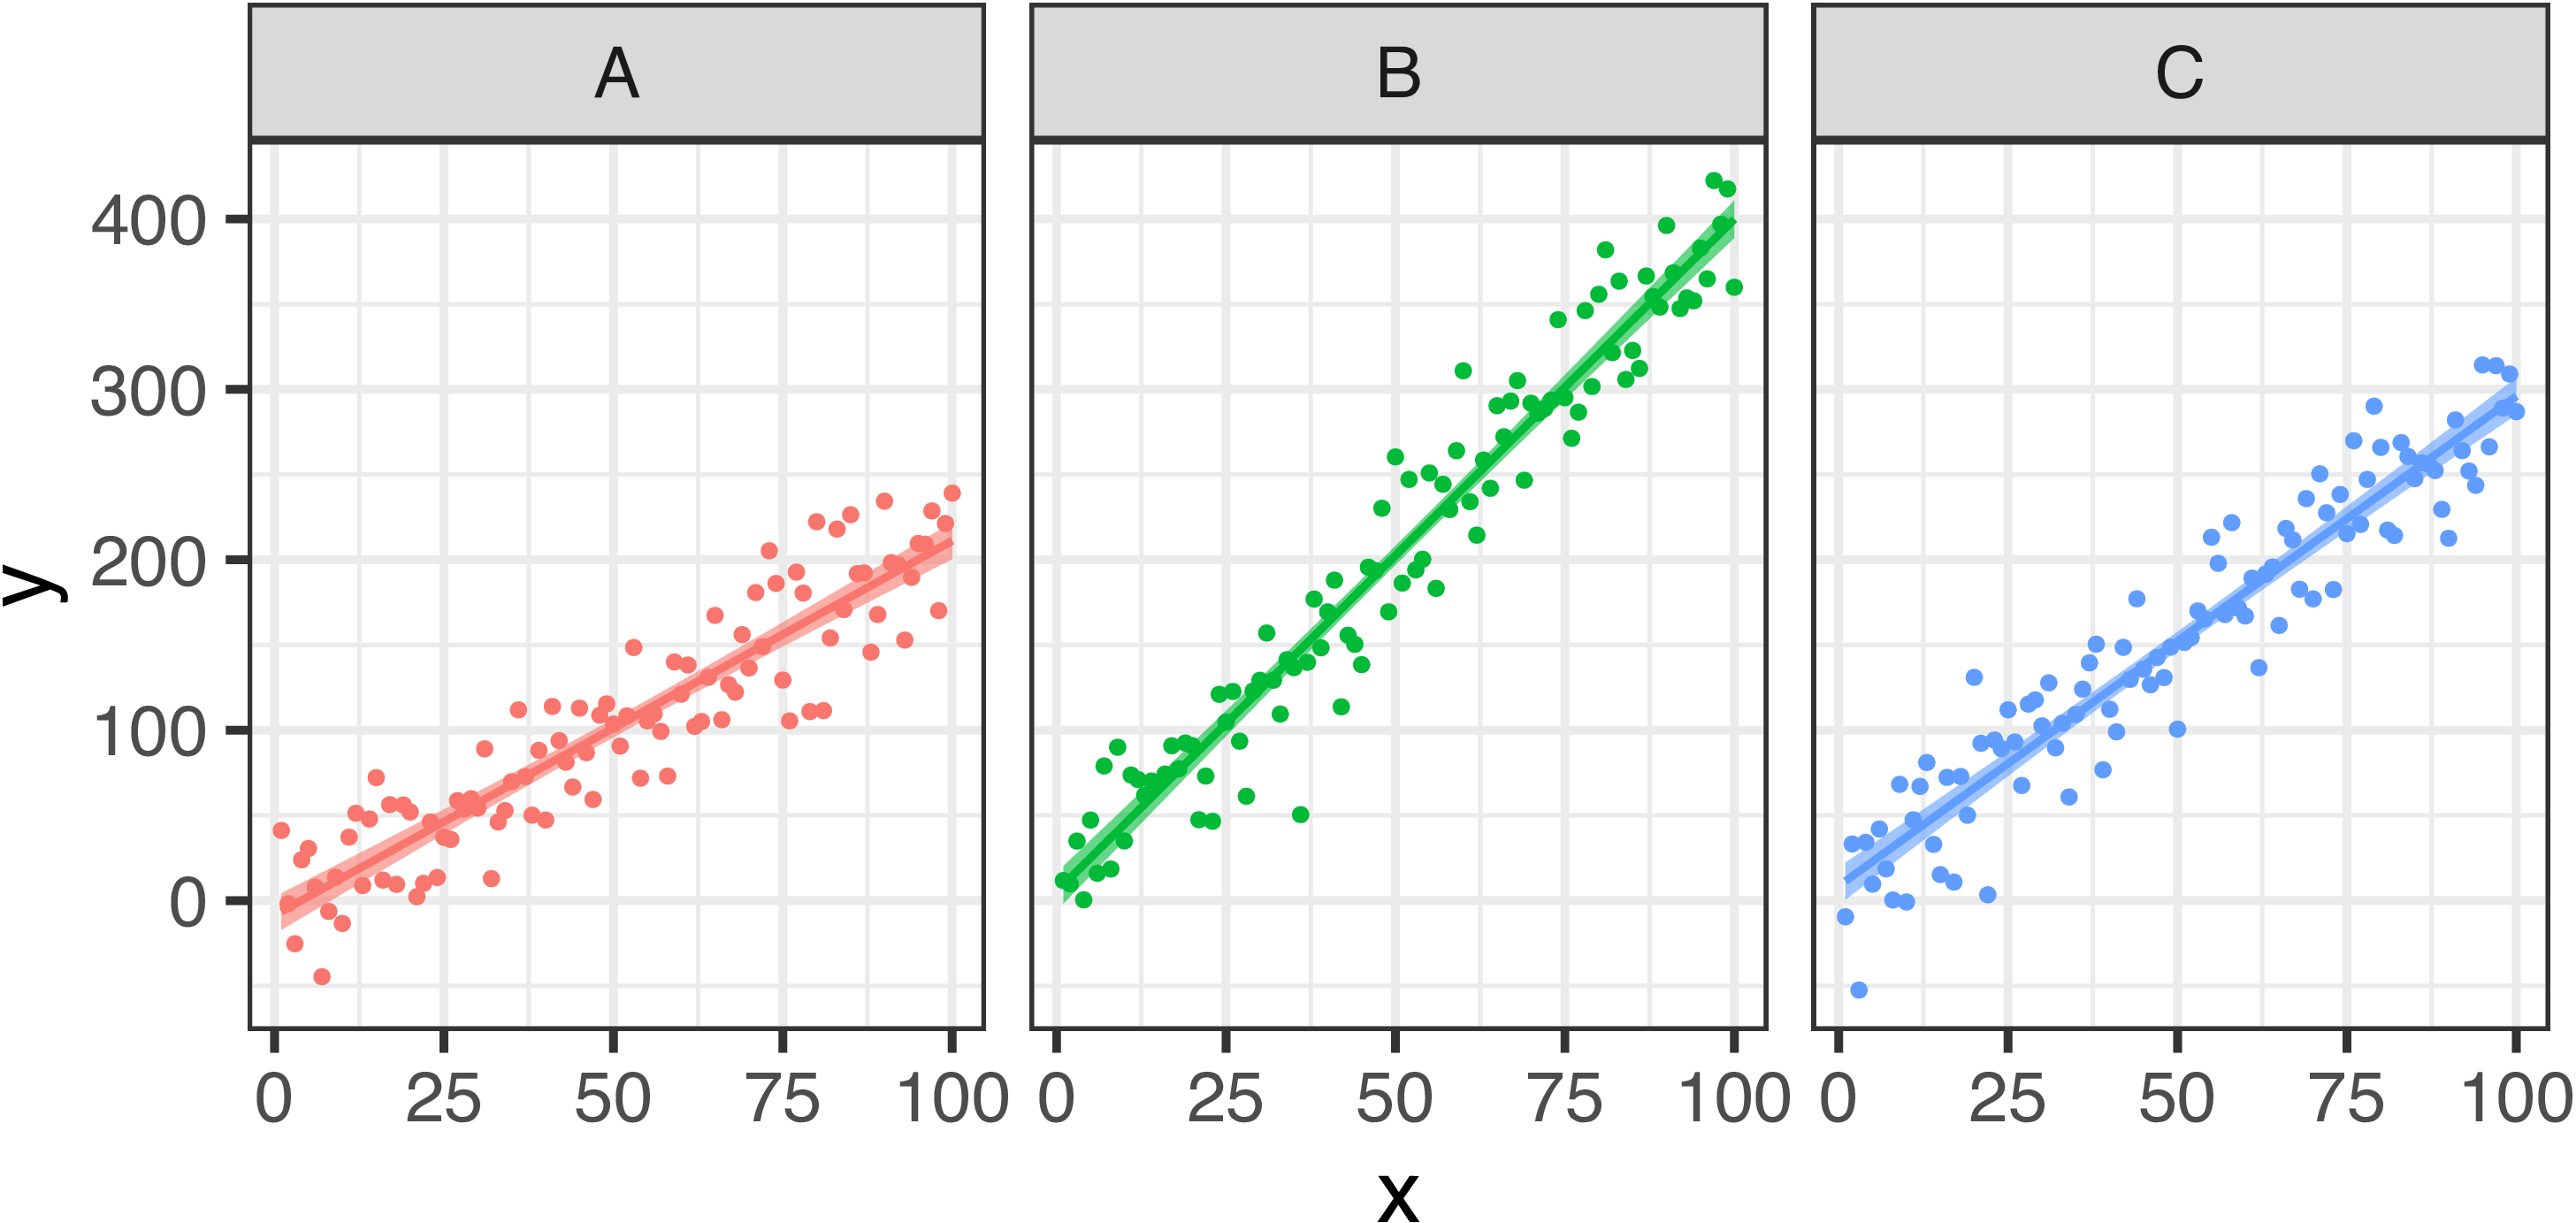 Fitted results from the linear regression models